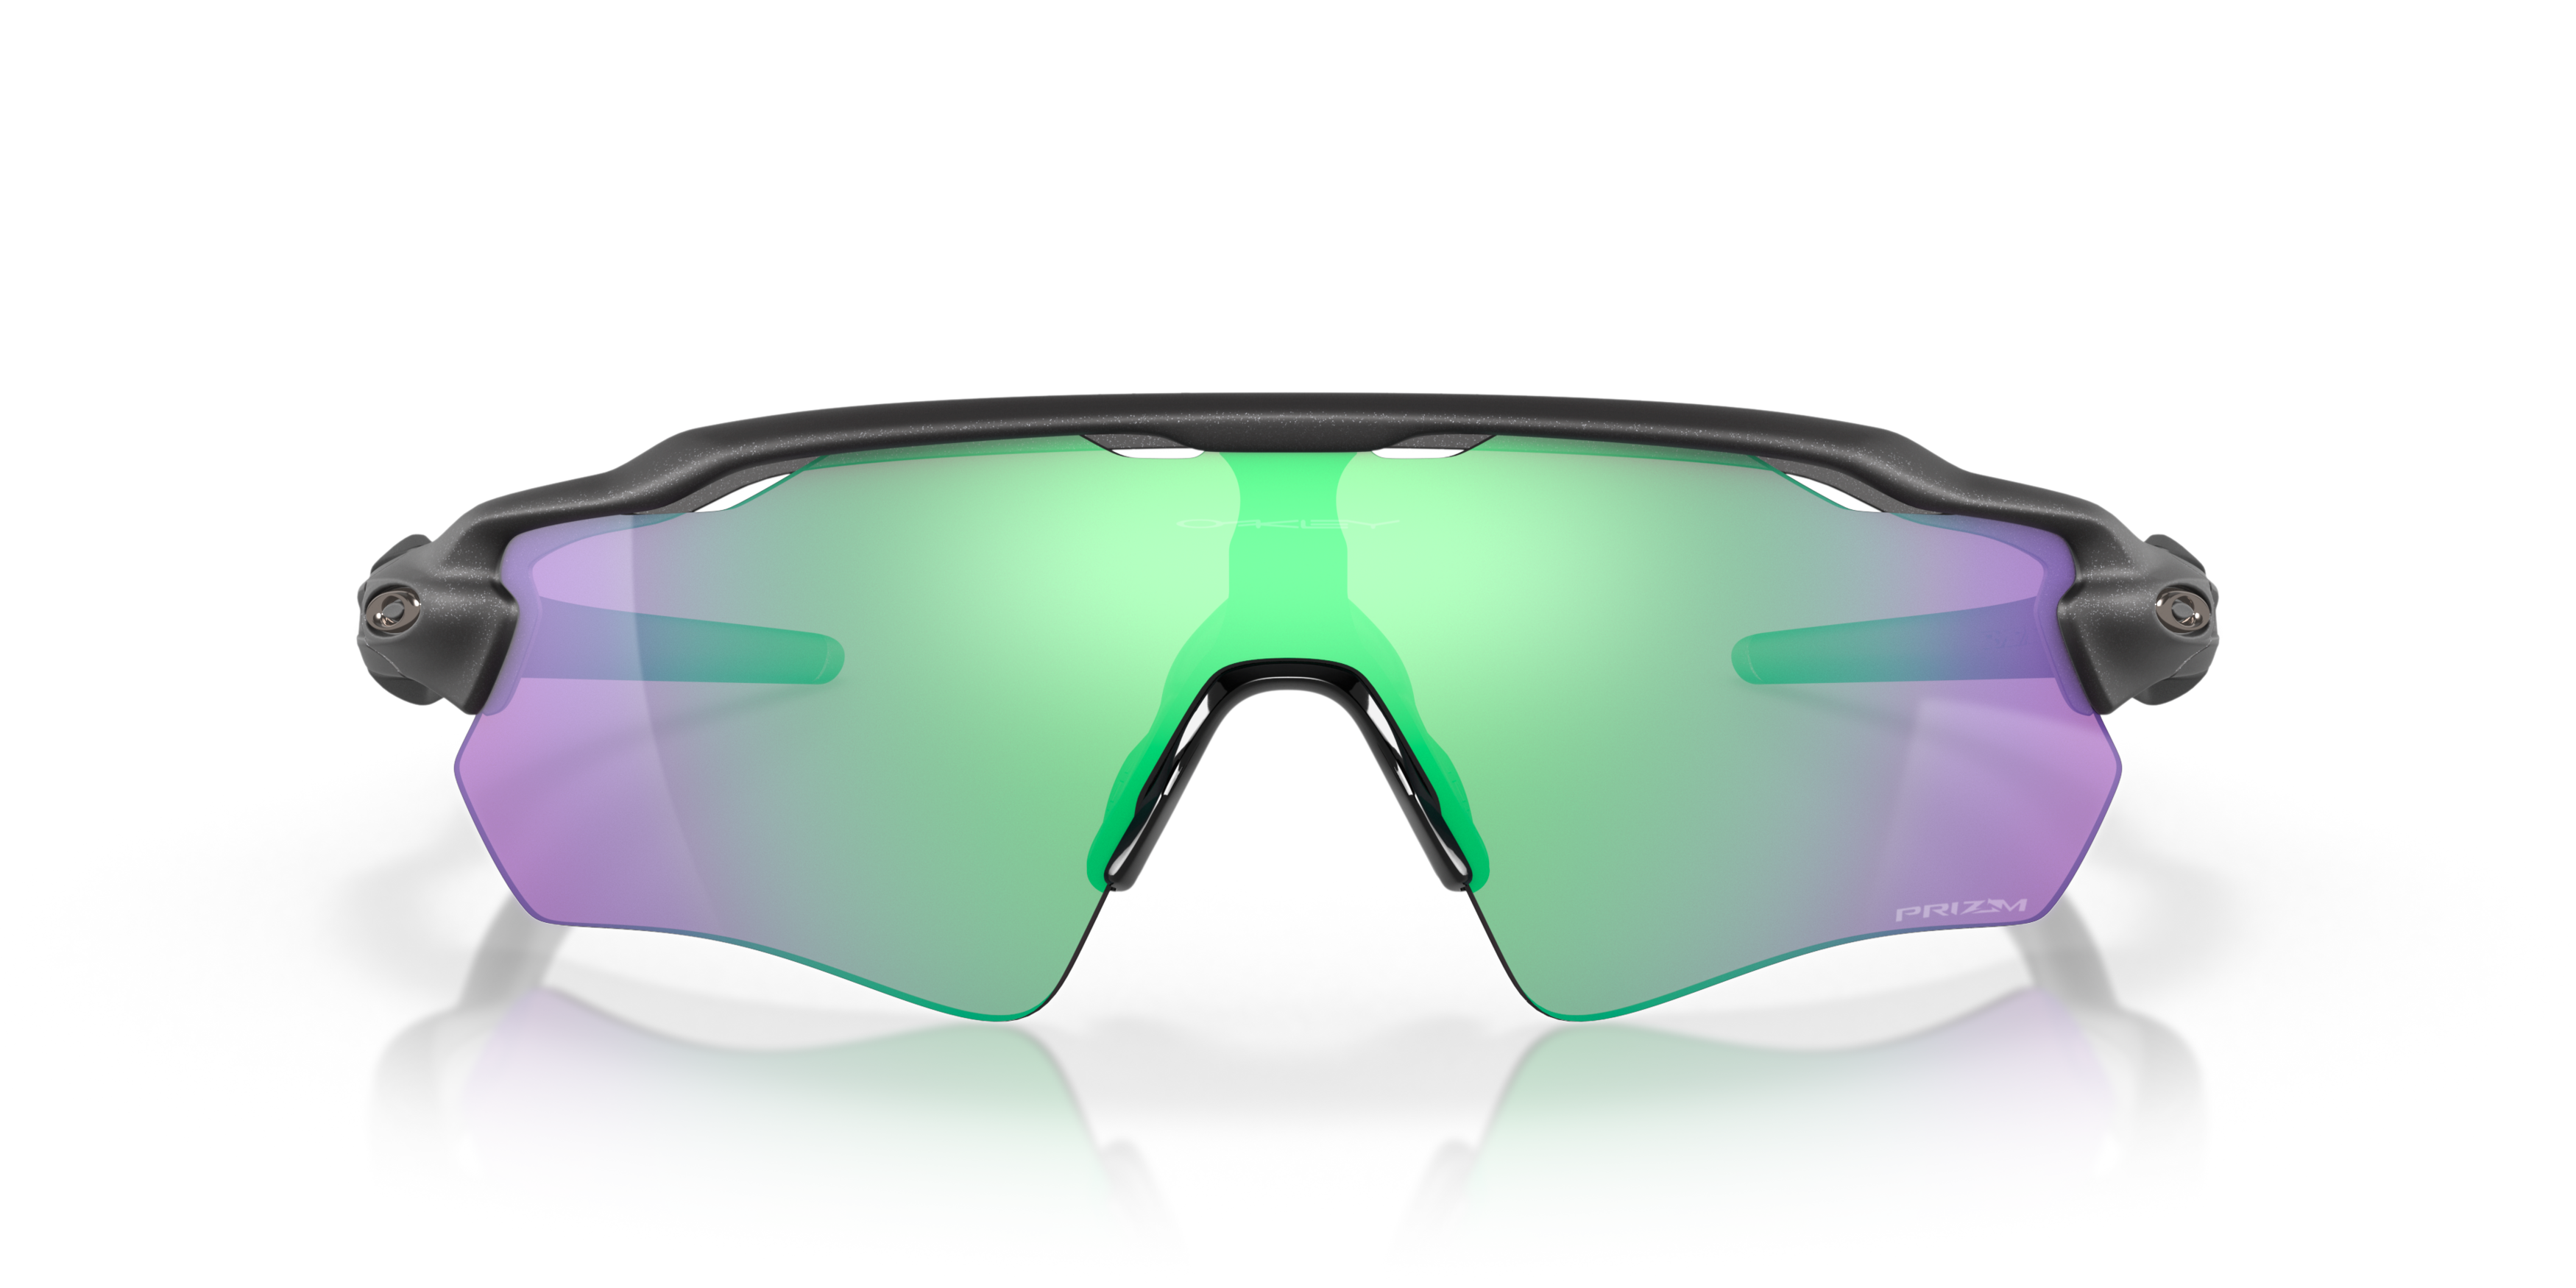 [products.image.front] Oakley OO9208 9208A1